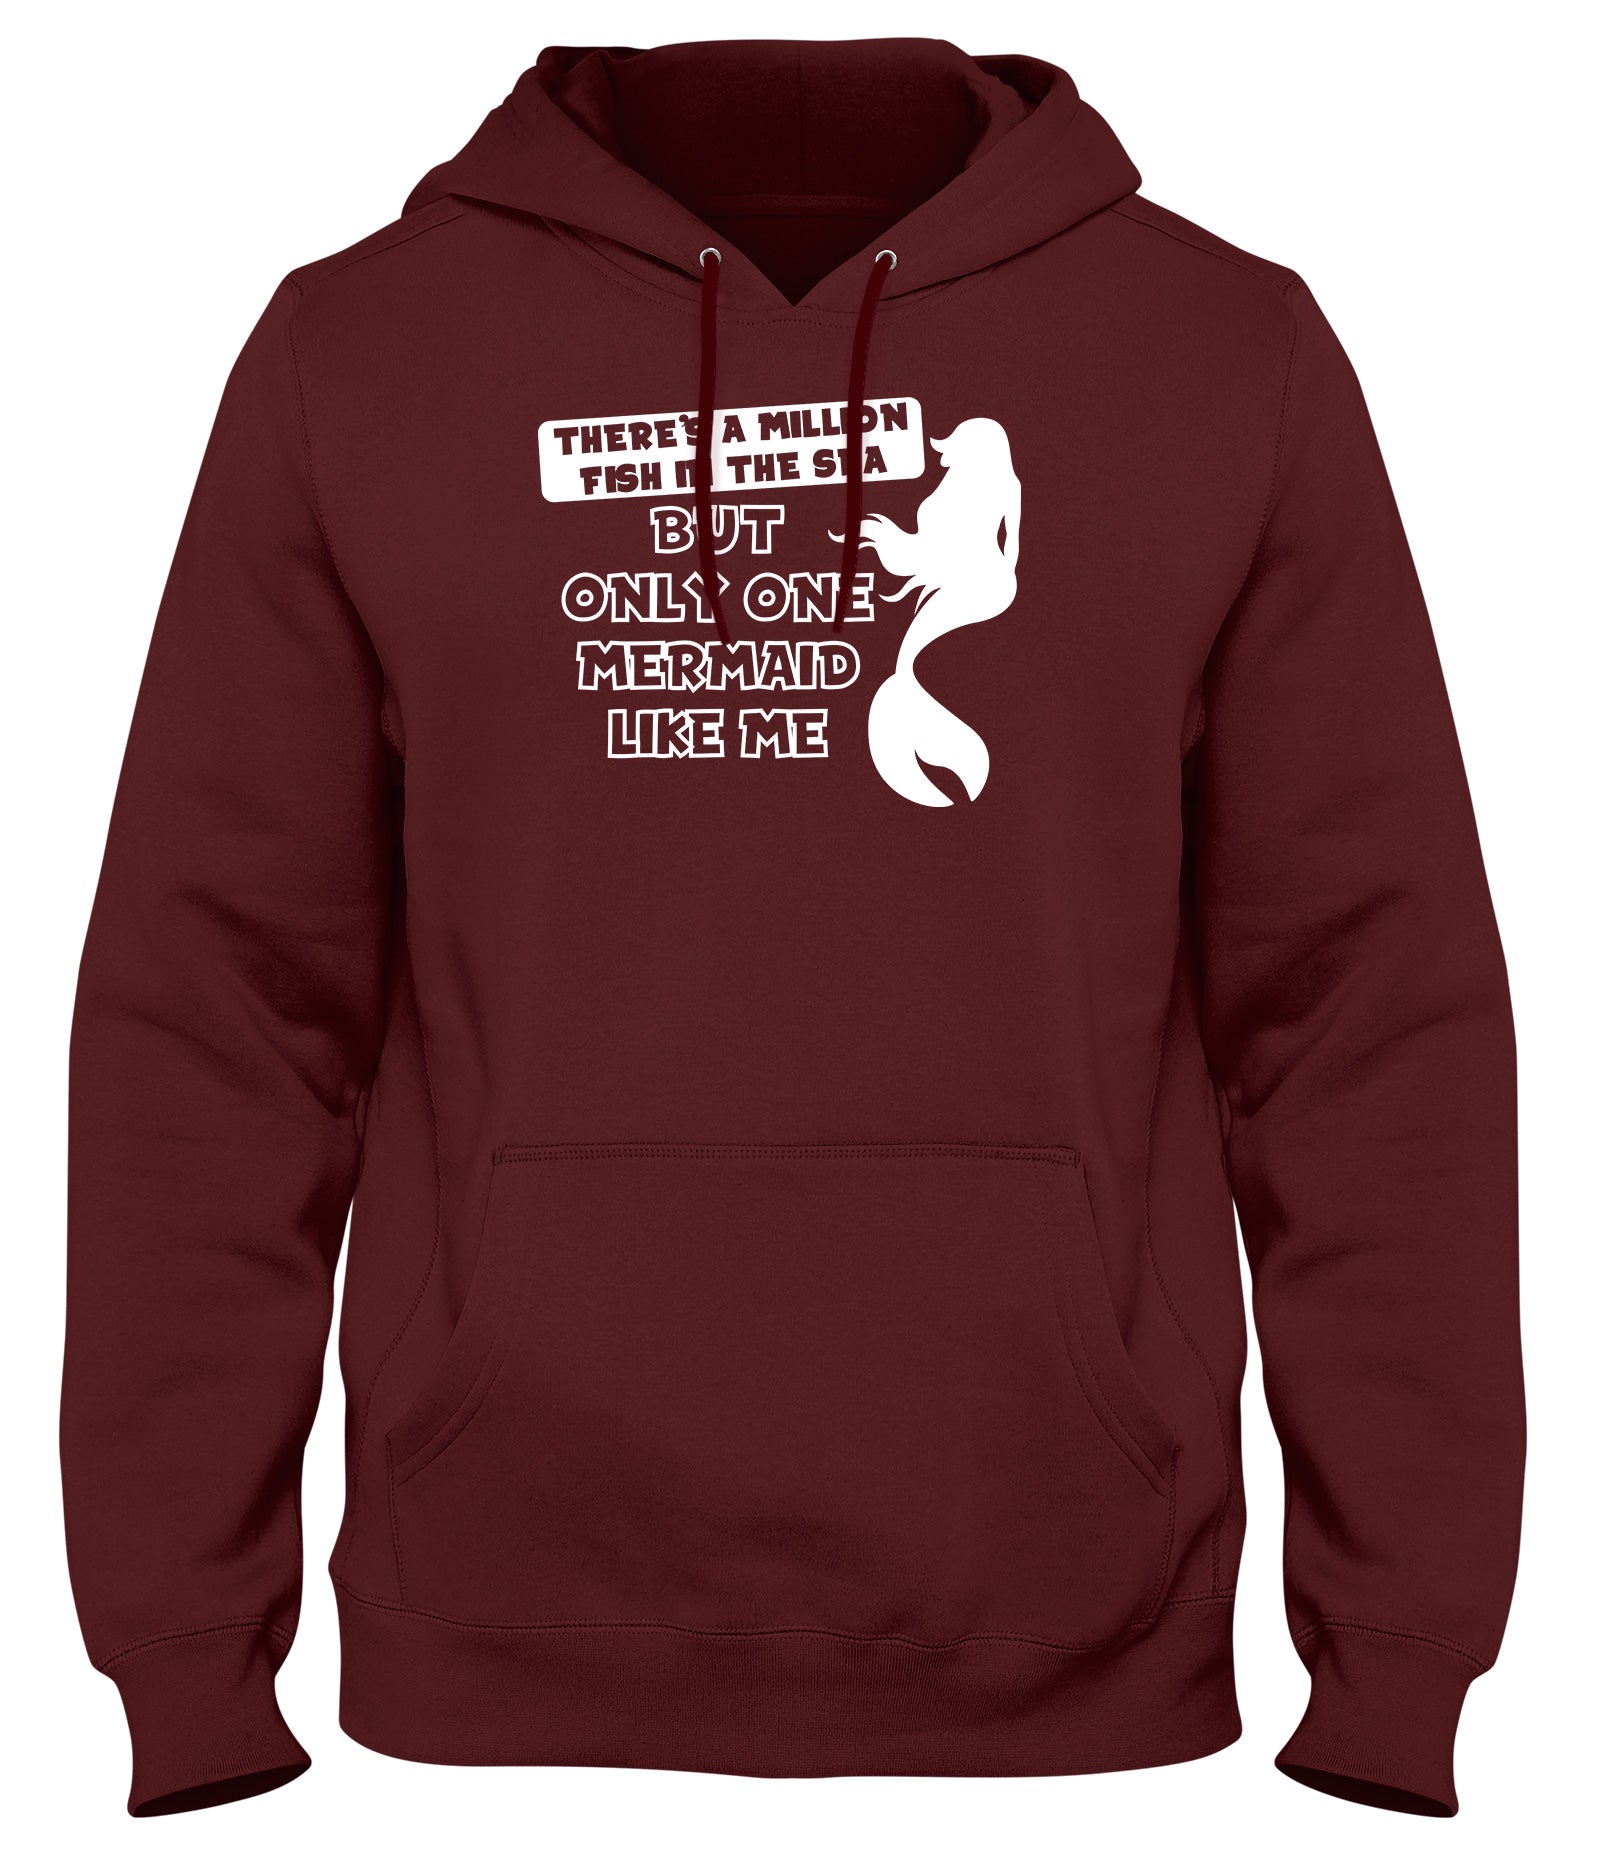 THERE'S A MILLION FISH IN THE SEA BUT ONLY ONE MERMAID LIKE ME MENS LADIES WOMENS UNISEX HOODIE